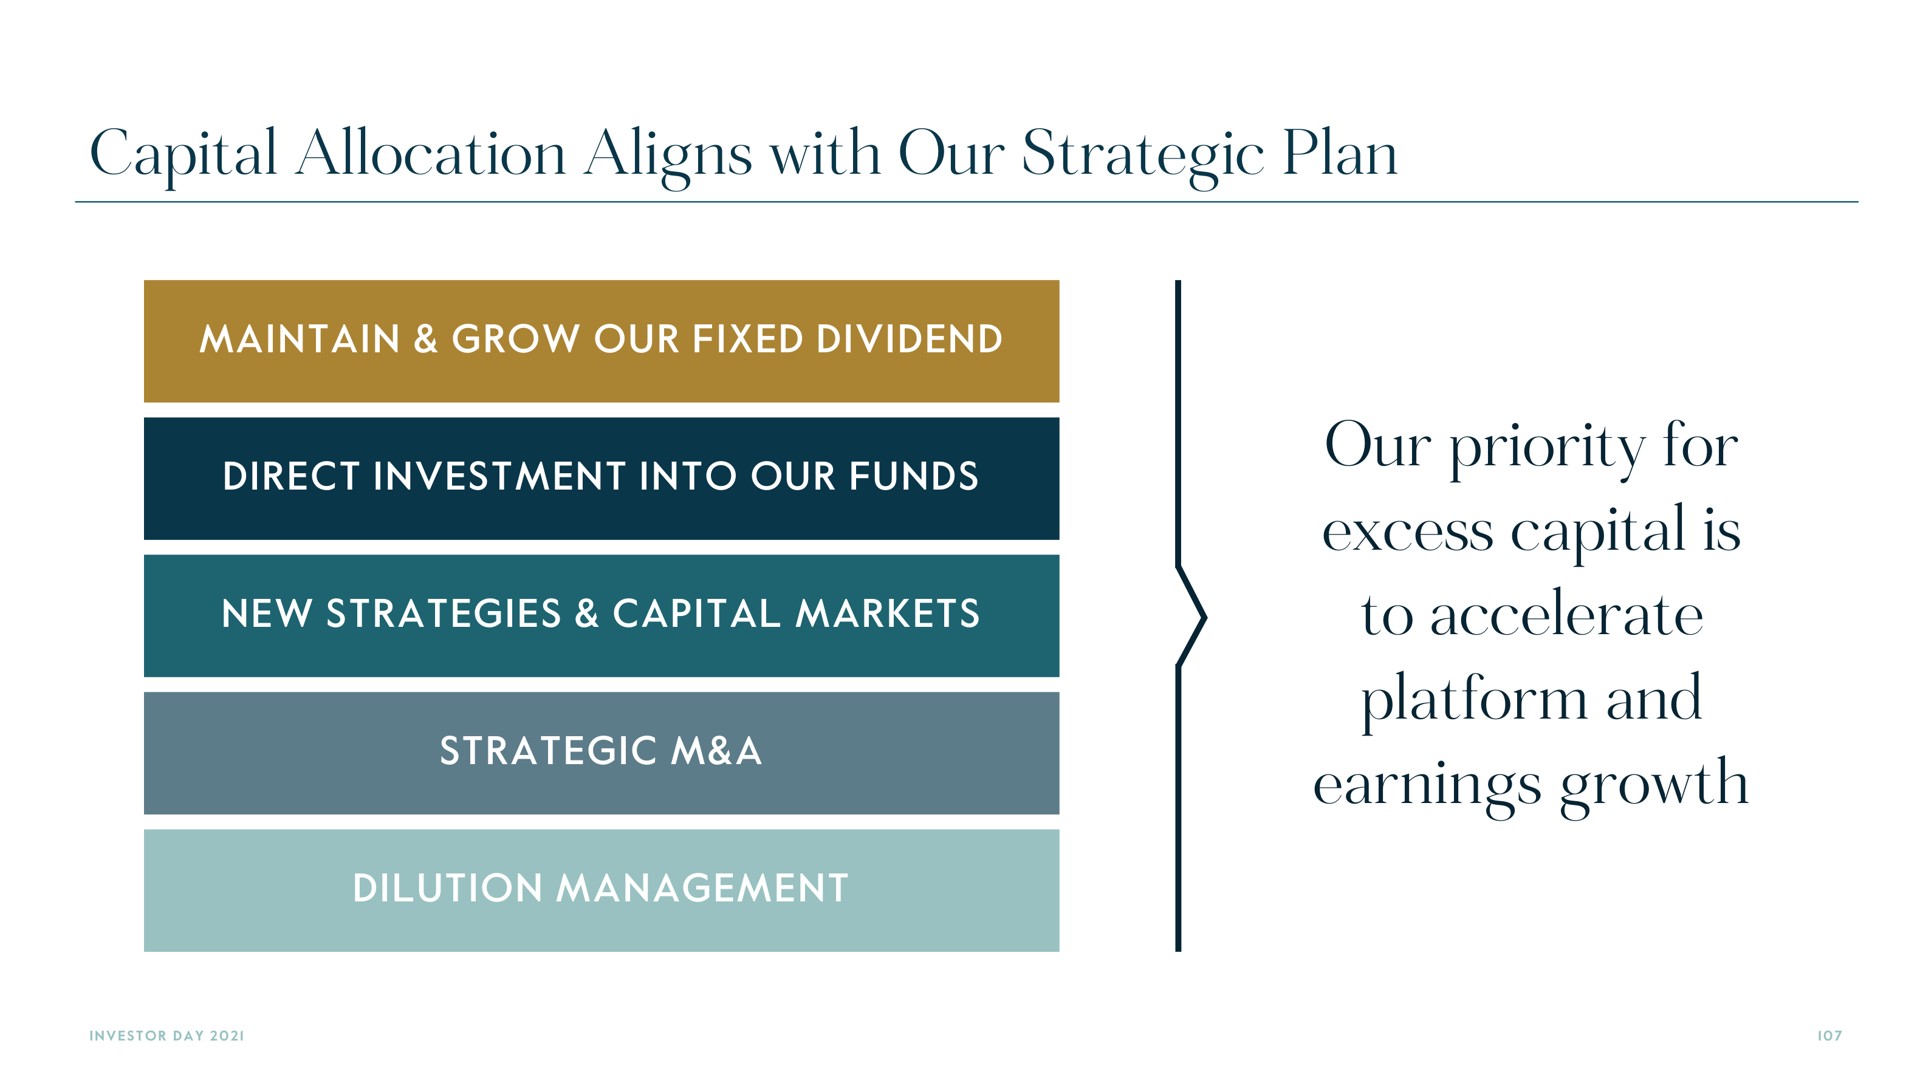 capital allocation aligns with our strategic plan our priority for excess capital is to accelerate platform and earnings growth | Carlyle